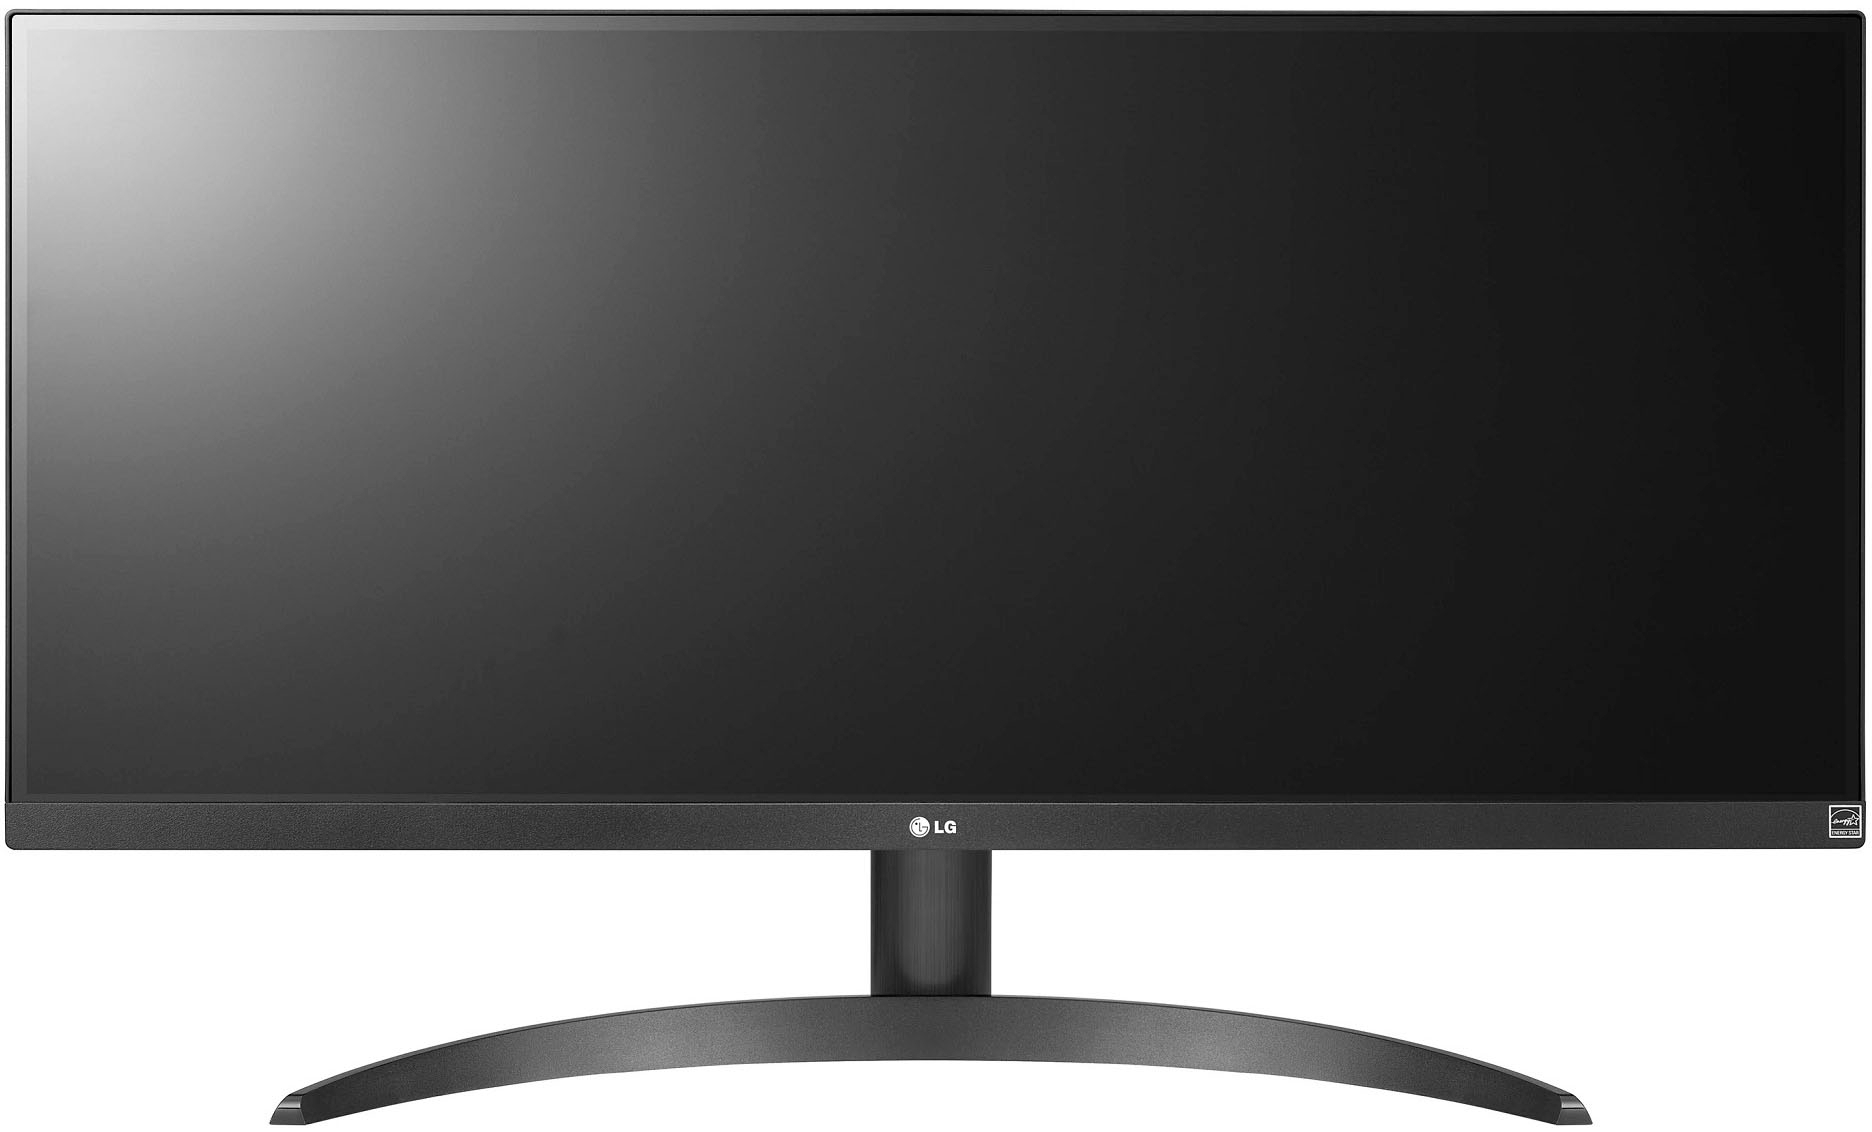 Left View: LG - 29” IPS LED UltraWide FHD 100Hz AMD FreeSync Monitor with HDR (HDMI, DisplayPort) - Black